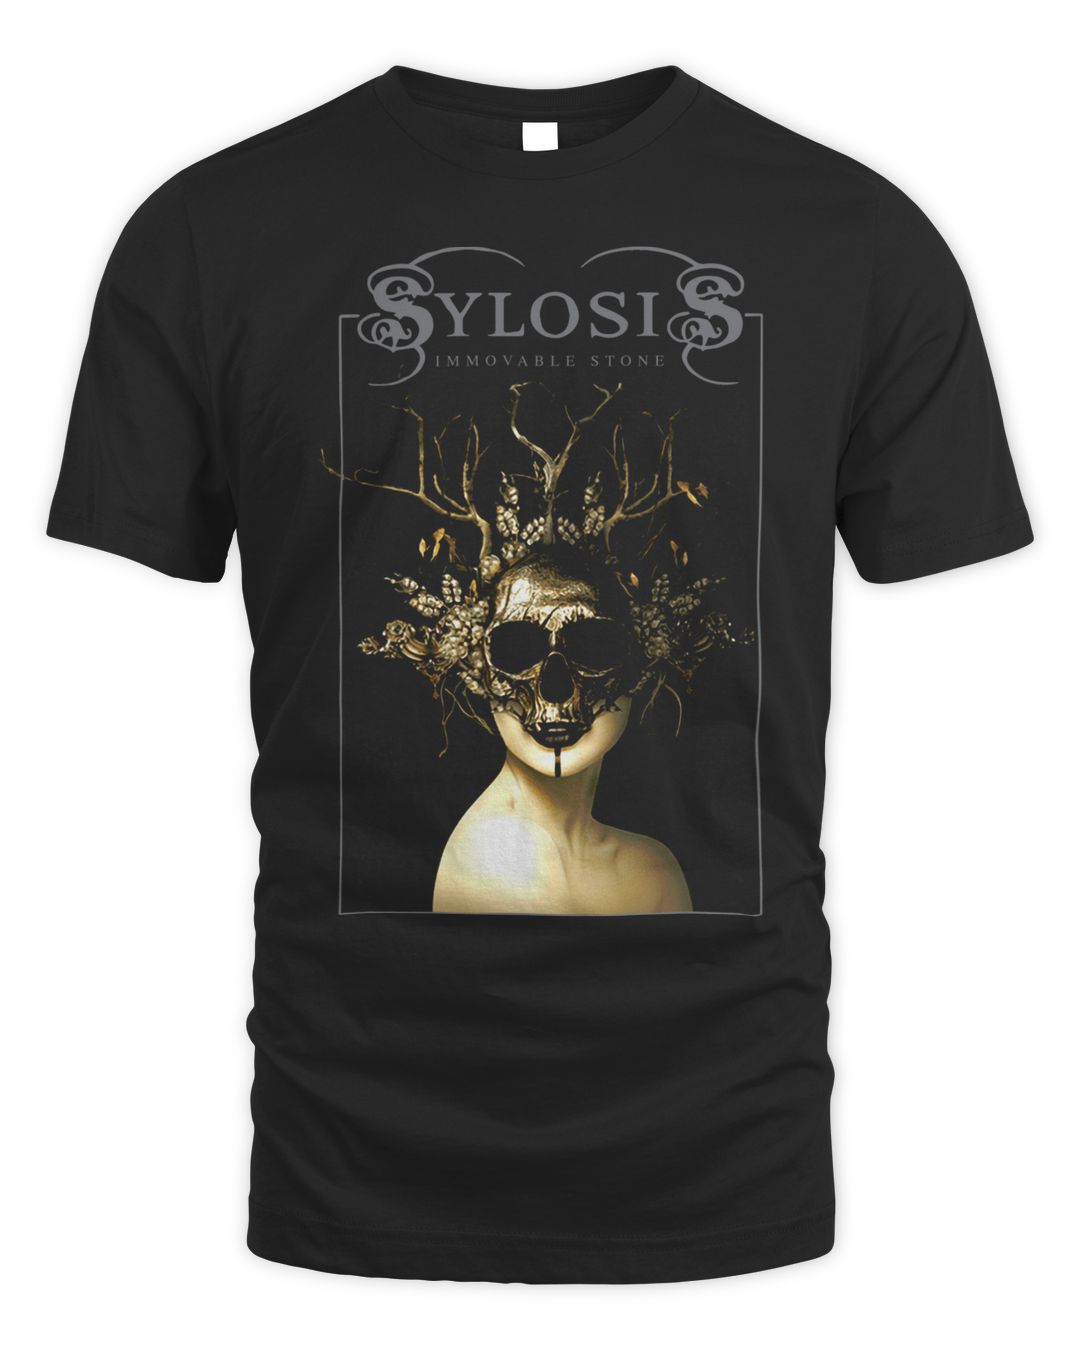 Sylosis Merch Immovable Stone Shirt